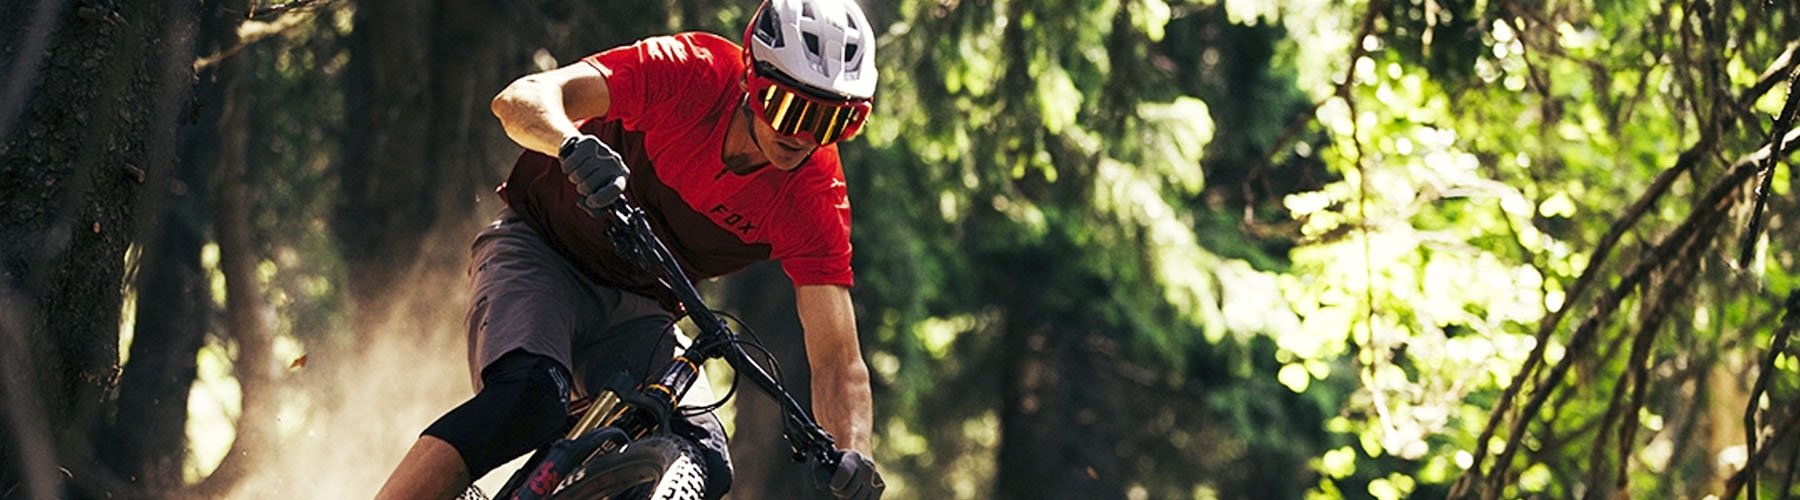 Mountain Bike Shorts  Shop for Durable and Comfortable MTB Shorts